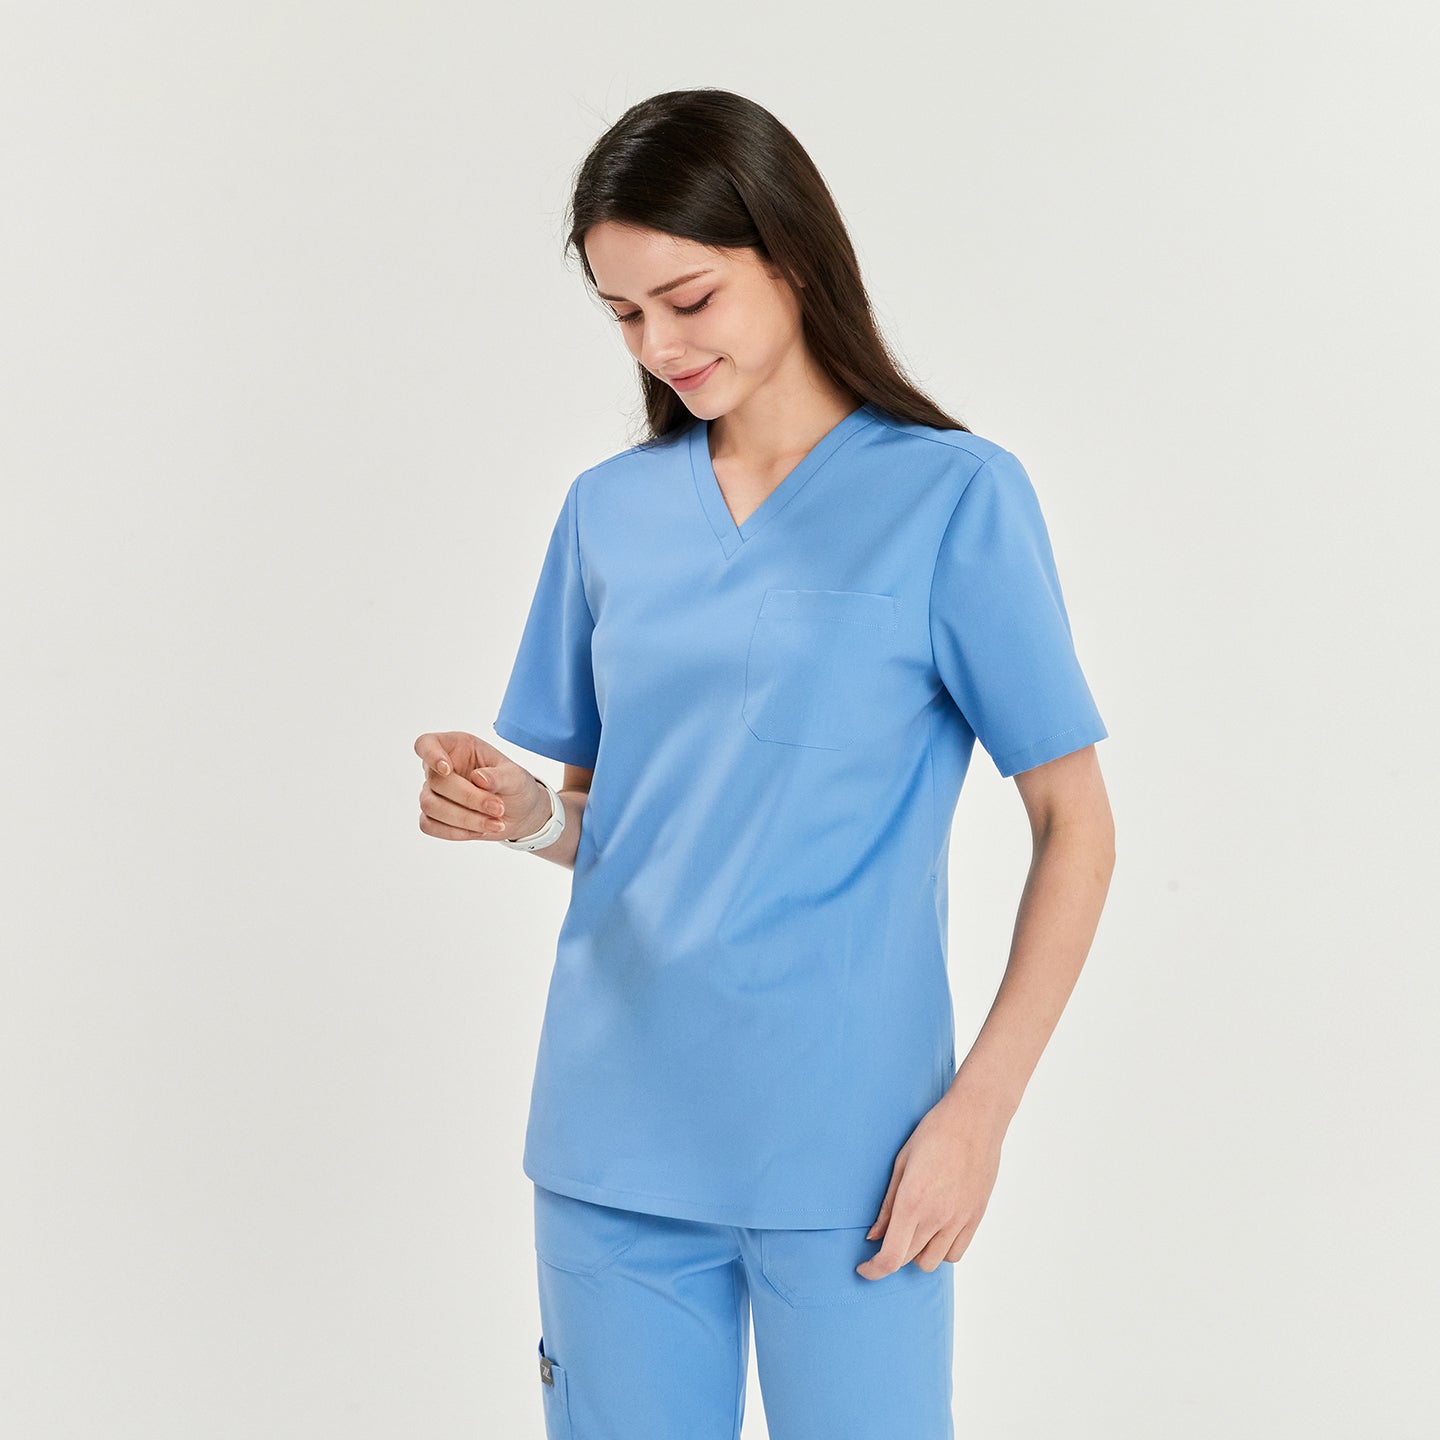 Woman wearing a V-neck scrub top and matching pants, looking down and smiling, with one hand on her side and the other hand slightly raised,Ceil Blue